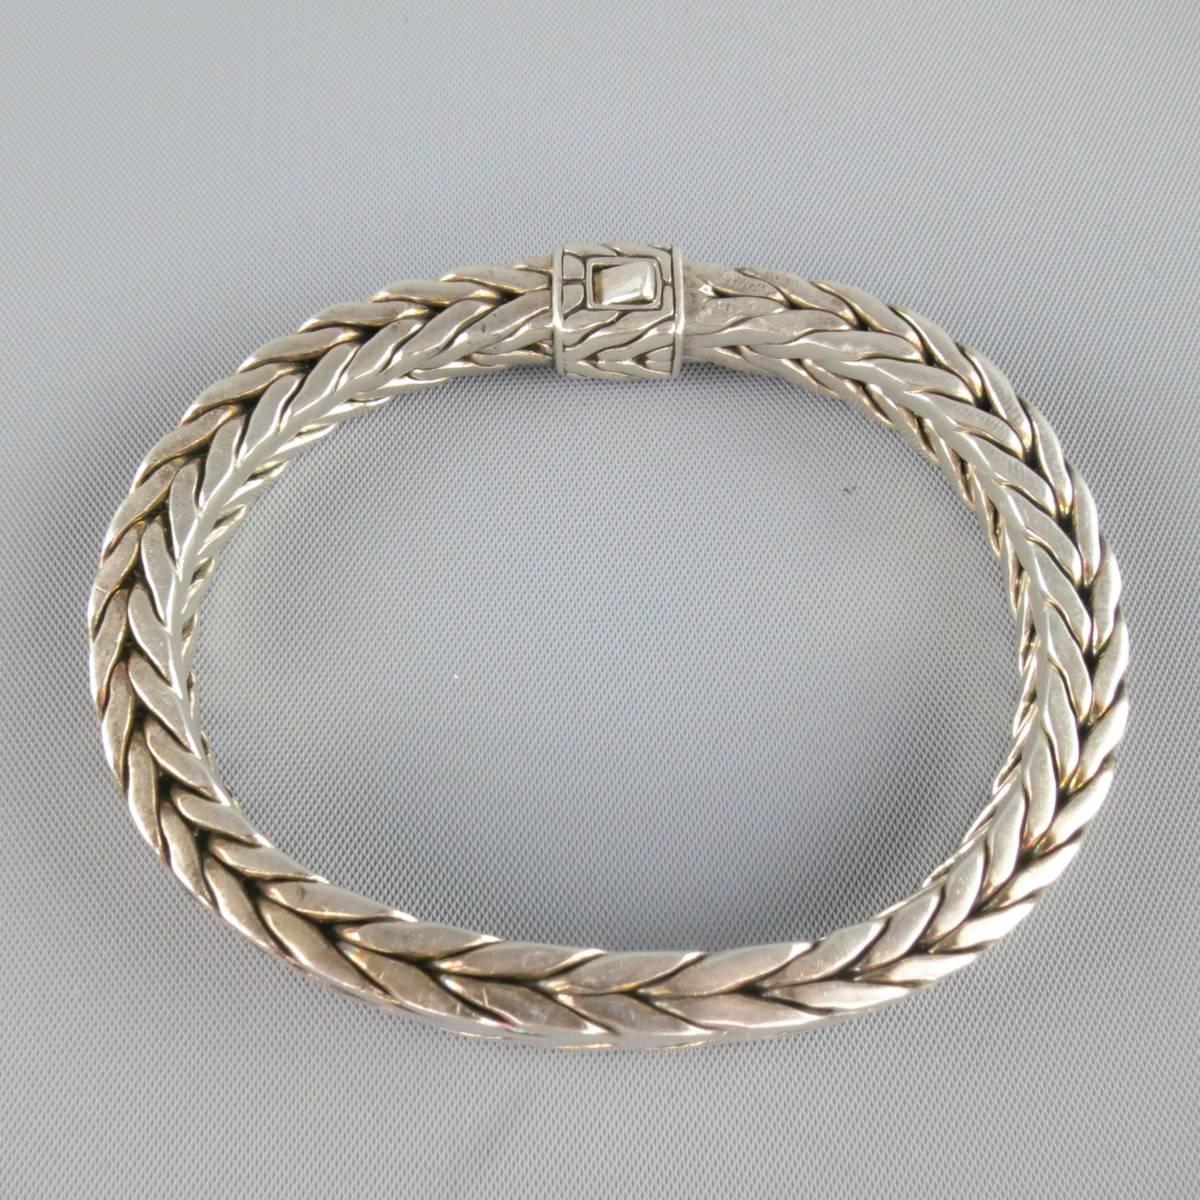 JOHN HARDY bracelet features a thick tapered braided sterling silver snake chain band with box closure.
 
Excellent Pre-Owned Condition.
 
Length: 21 cm.
Width: 1.5 cm.


Web ID: 82639 